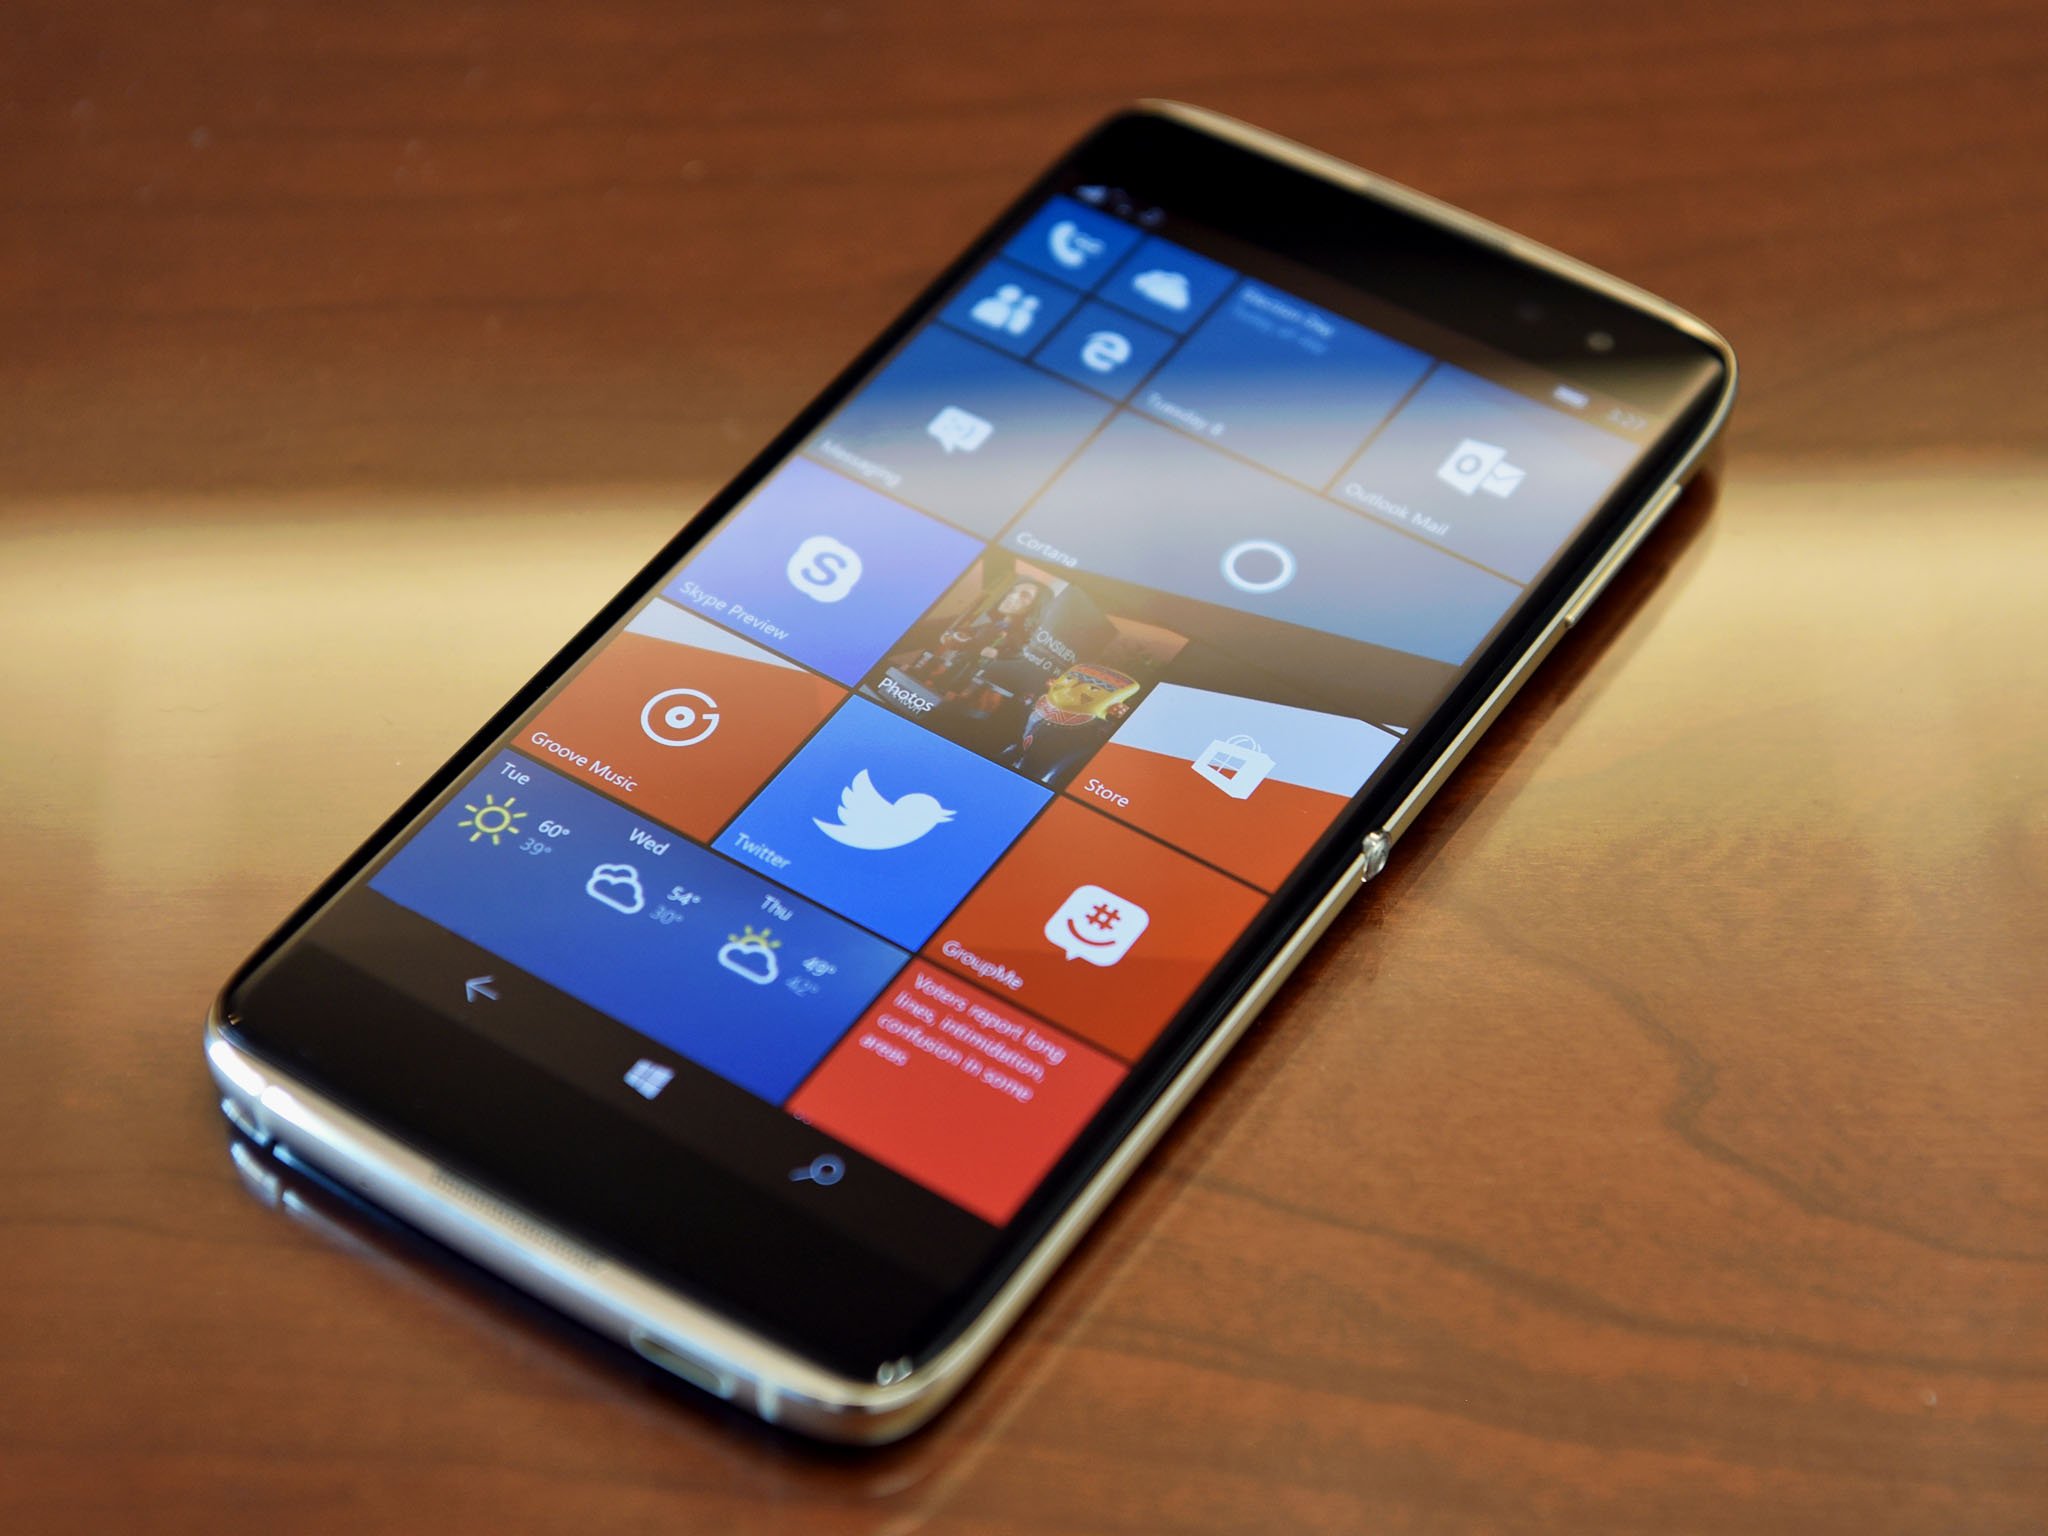 Pick up the Alcatel Idol 4S with Windows 10 Mobile for $99